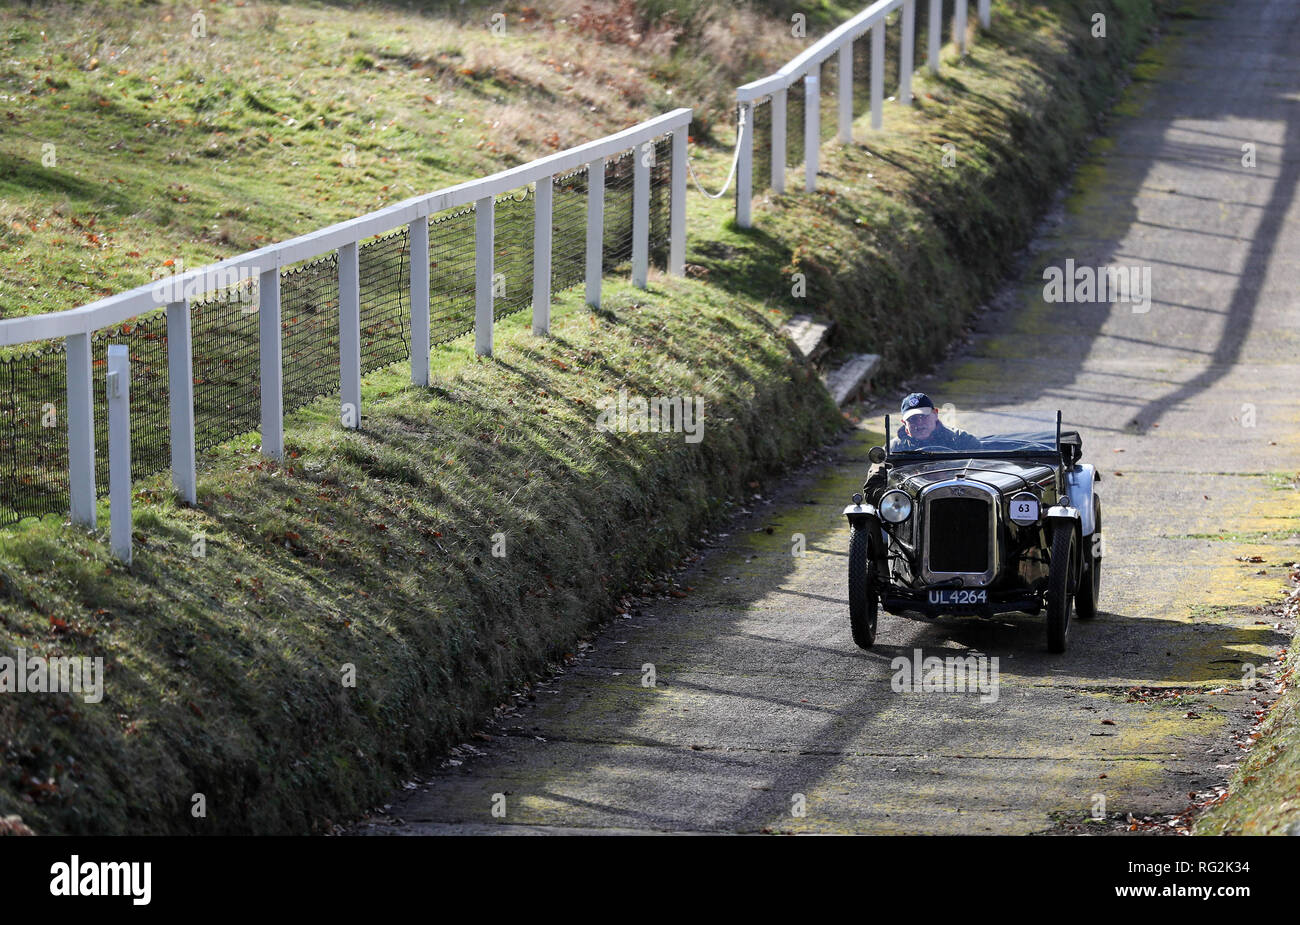 A competitor in their 1930 Austin 7, takes on the 'Test Hill' as they take part in the Vintage Sports-Car Club's annual driving tests at the Brooklands Museum in Weybridge, Surrey. Stock Photo